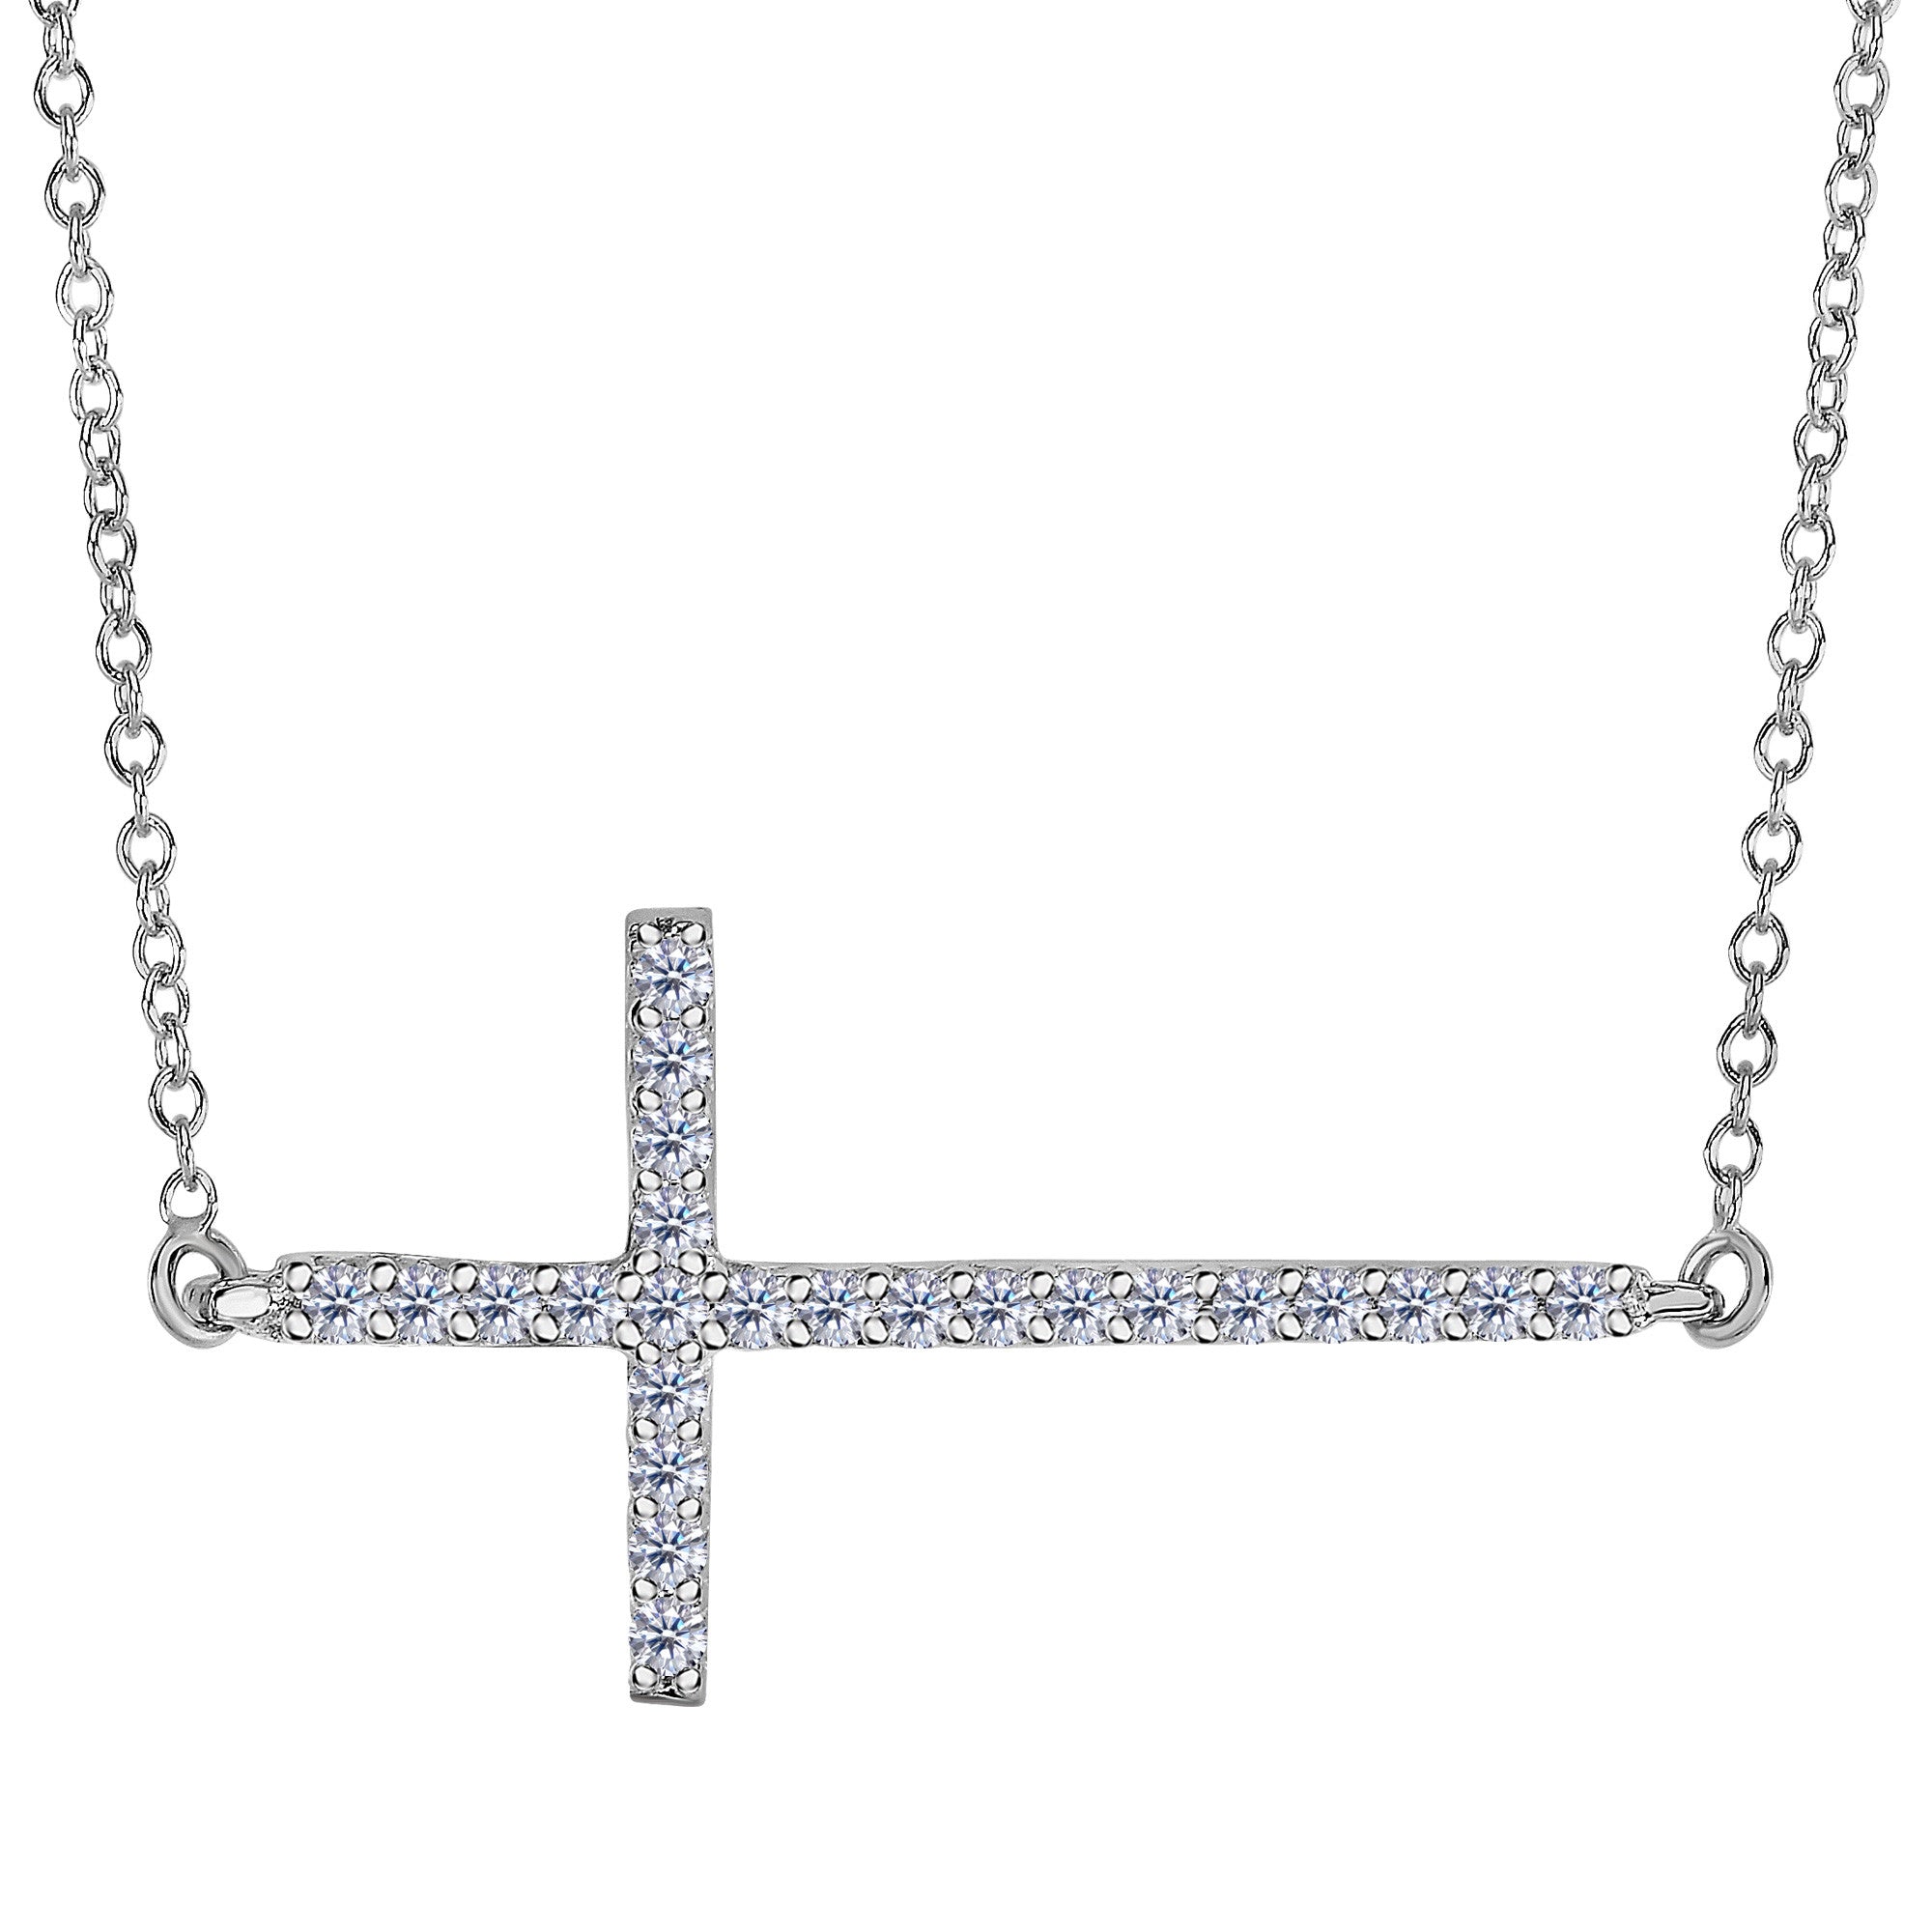 14k Yellow Gold With 0.05ct Diamonds Side Ways Cross Necklace - 18 Inches fine designer jewelry for men and women